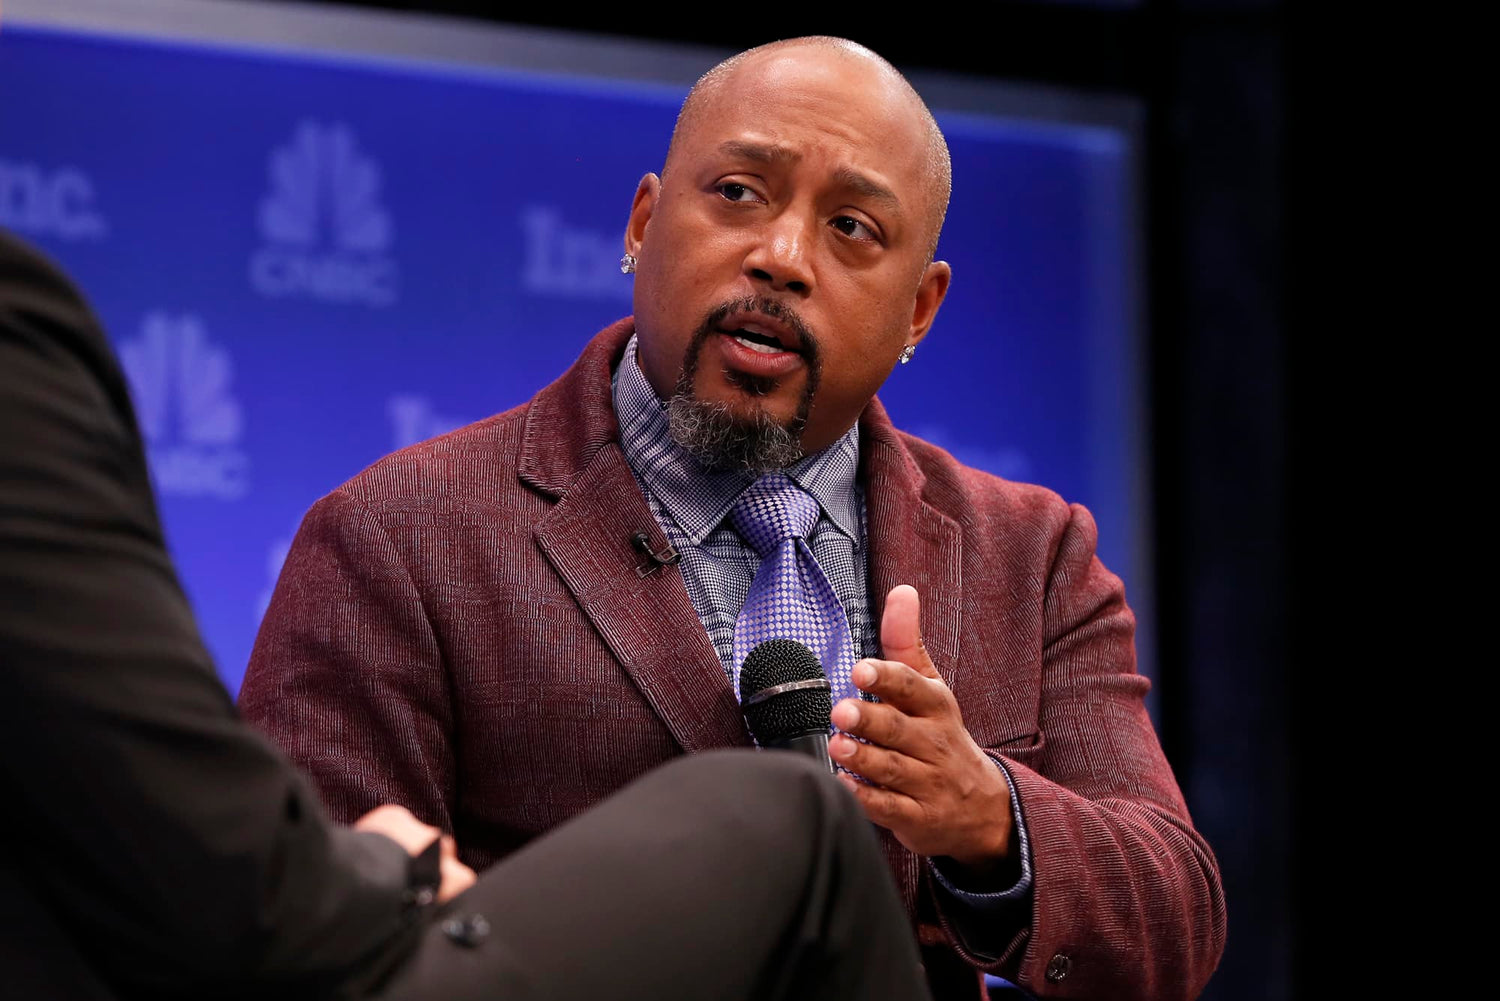 7 Questions to Uncover Your Personal Brand – DaymondJohn.com